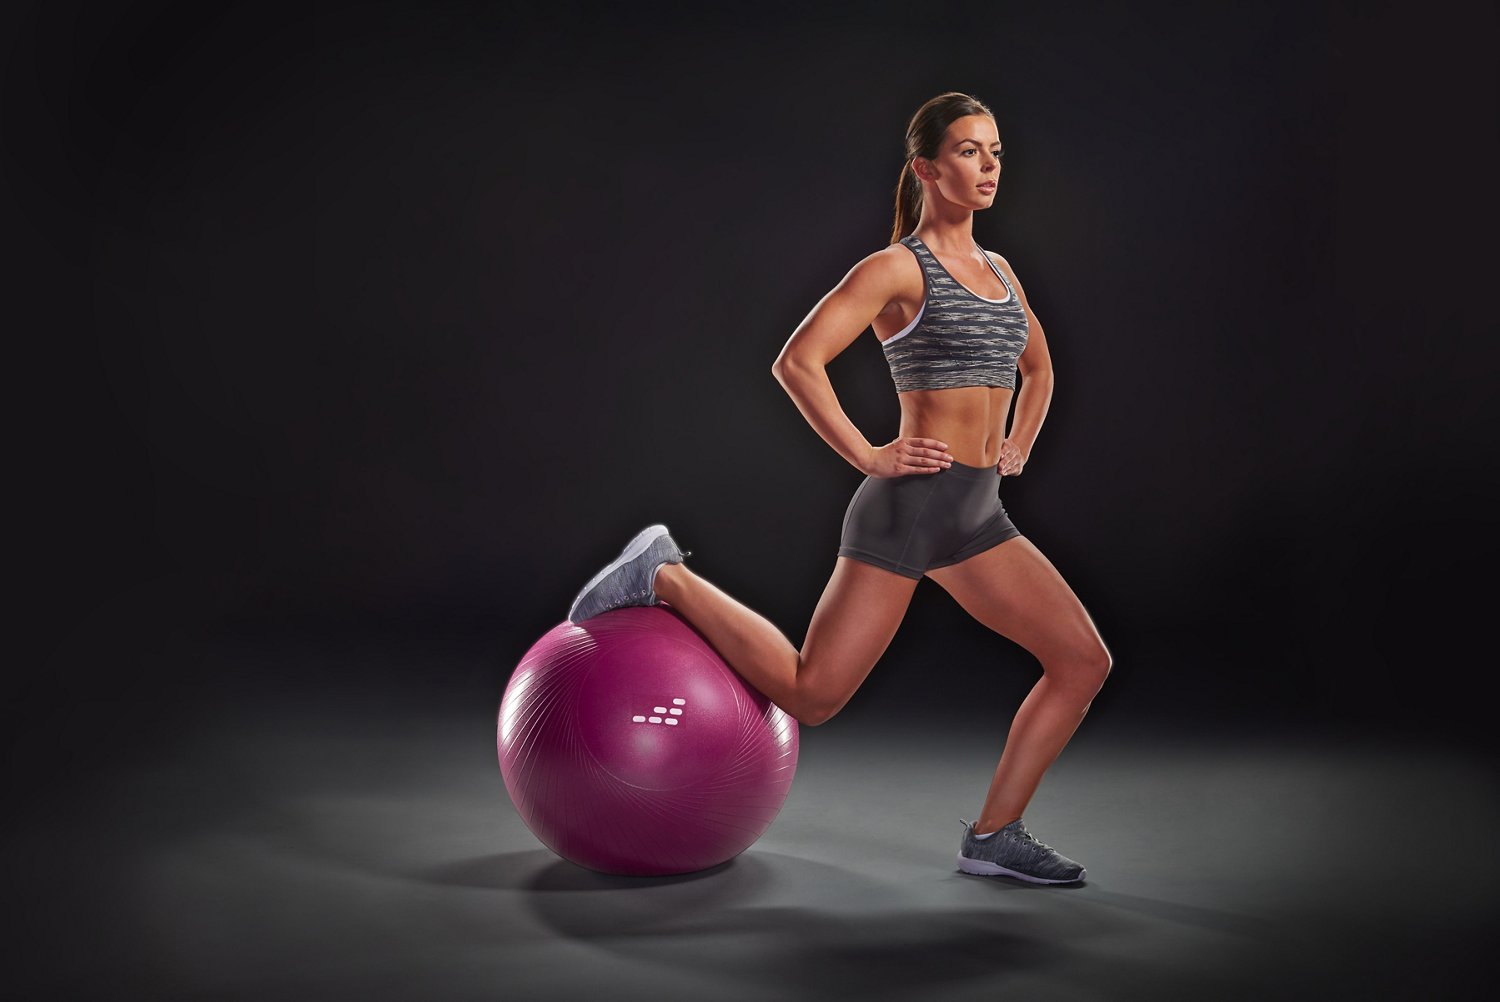 bcg stability ball